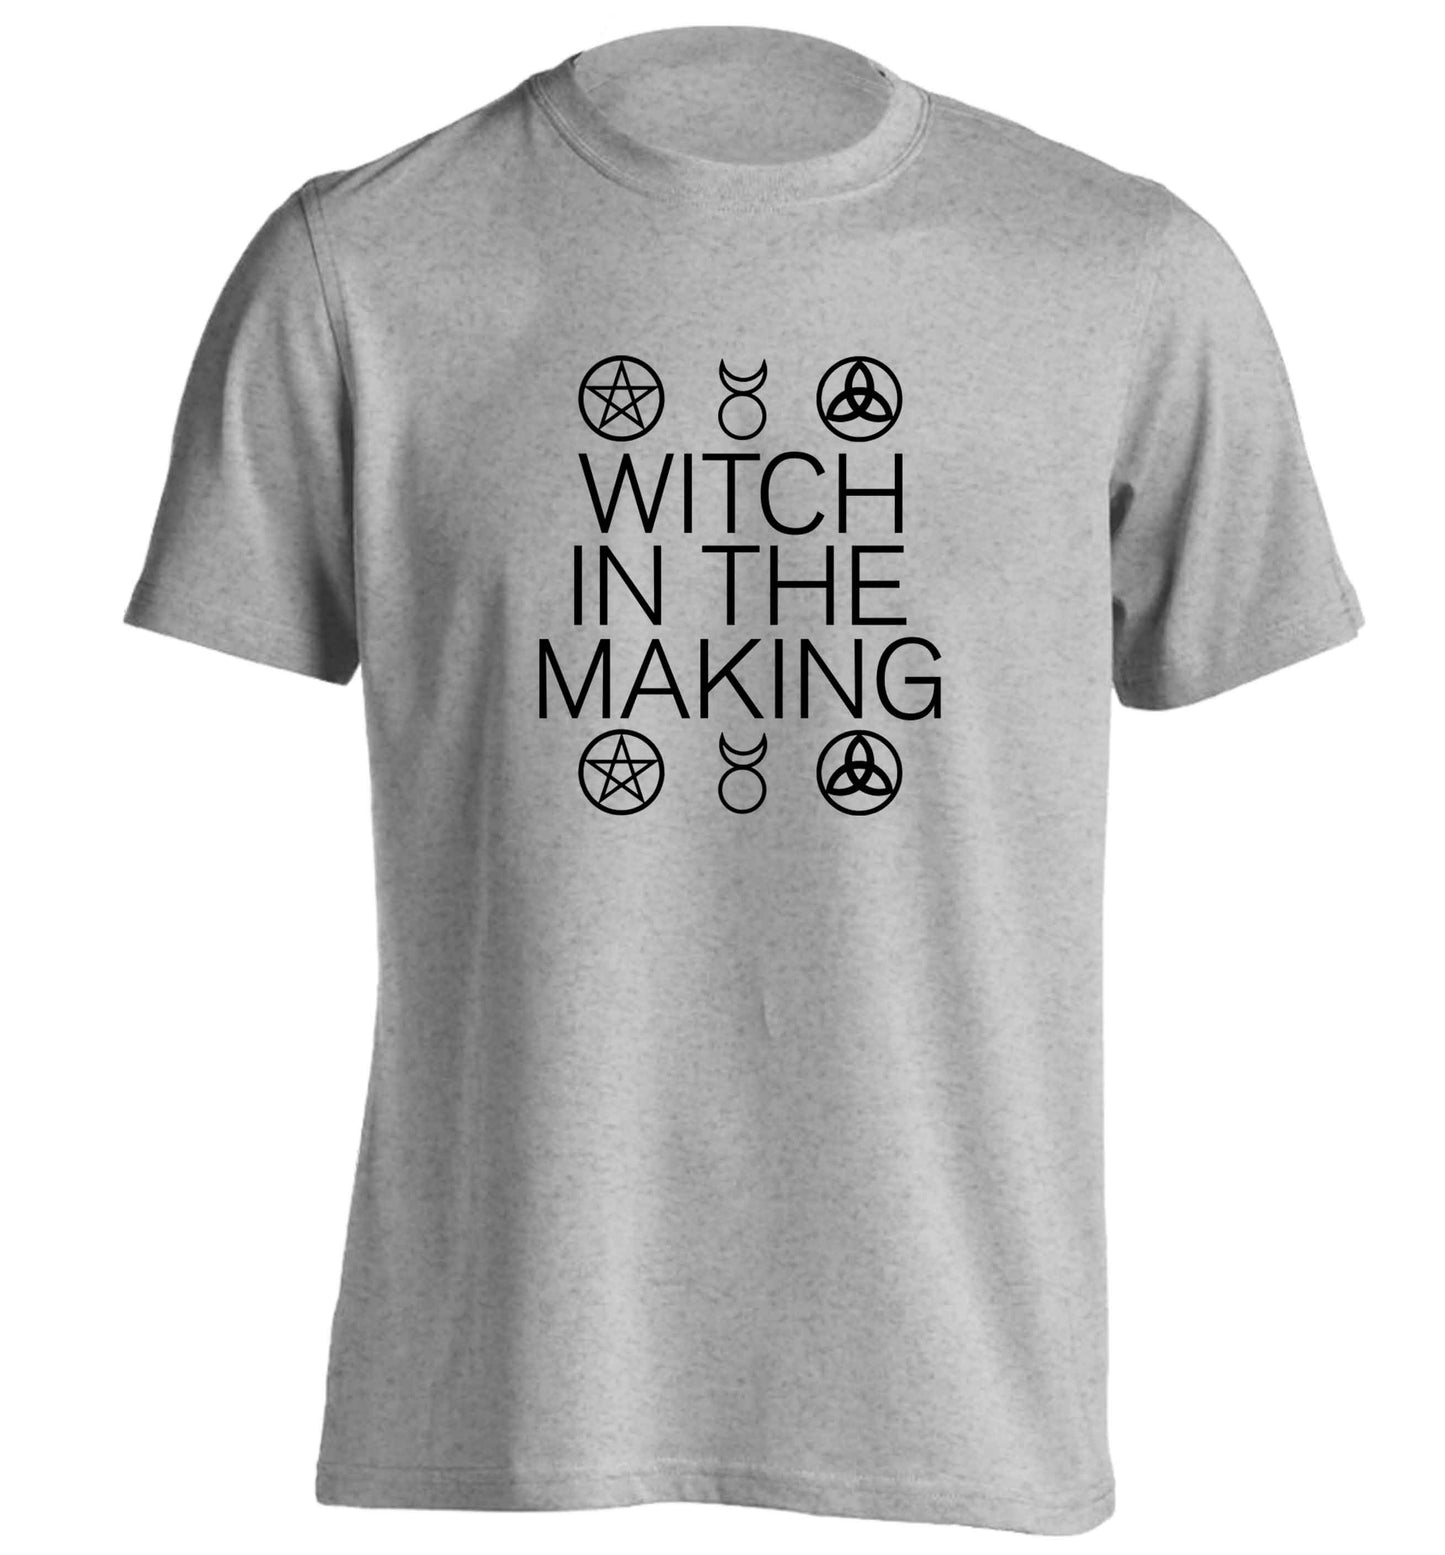 Witch in the making adults unisex grey Tshirt 2XL